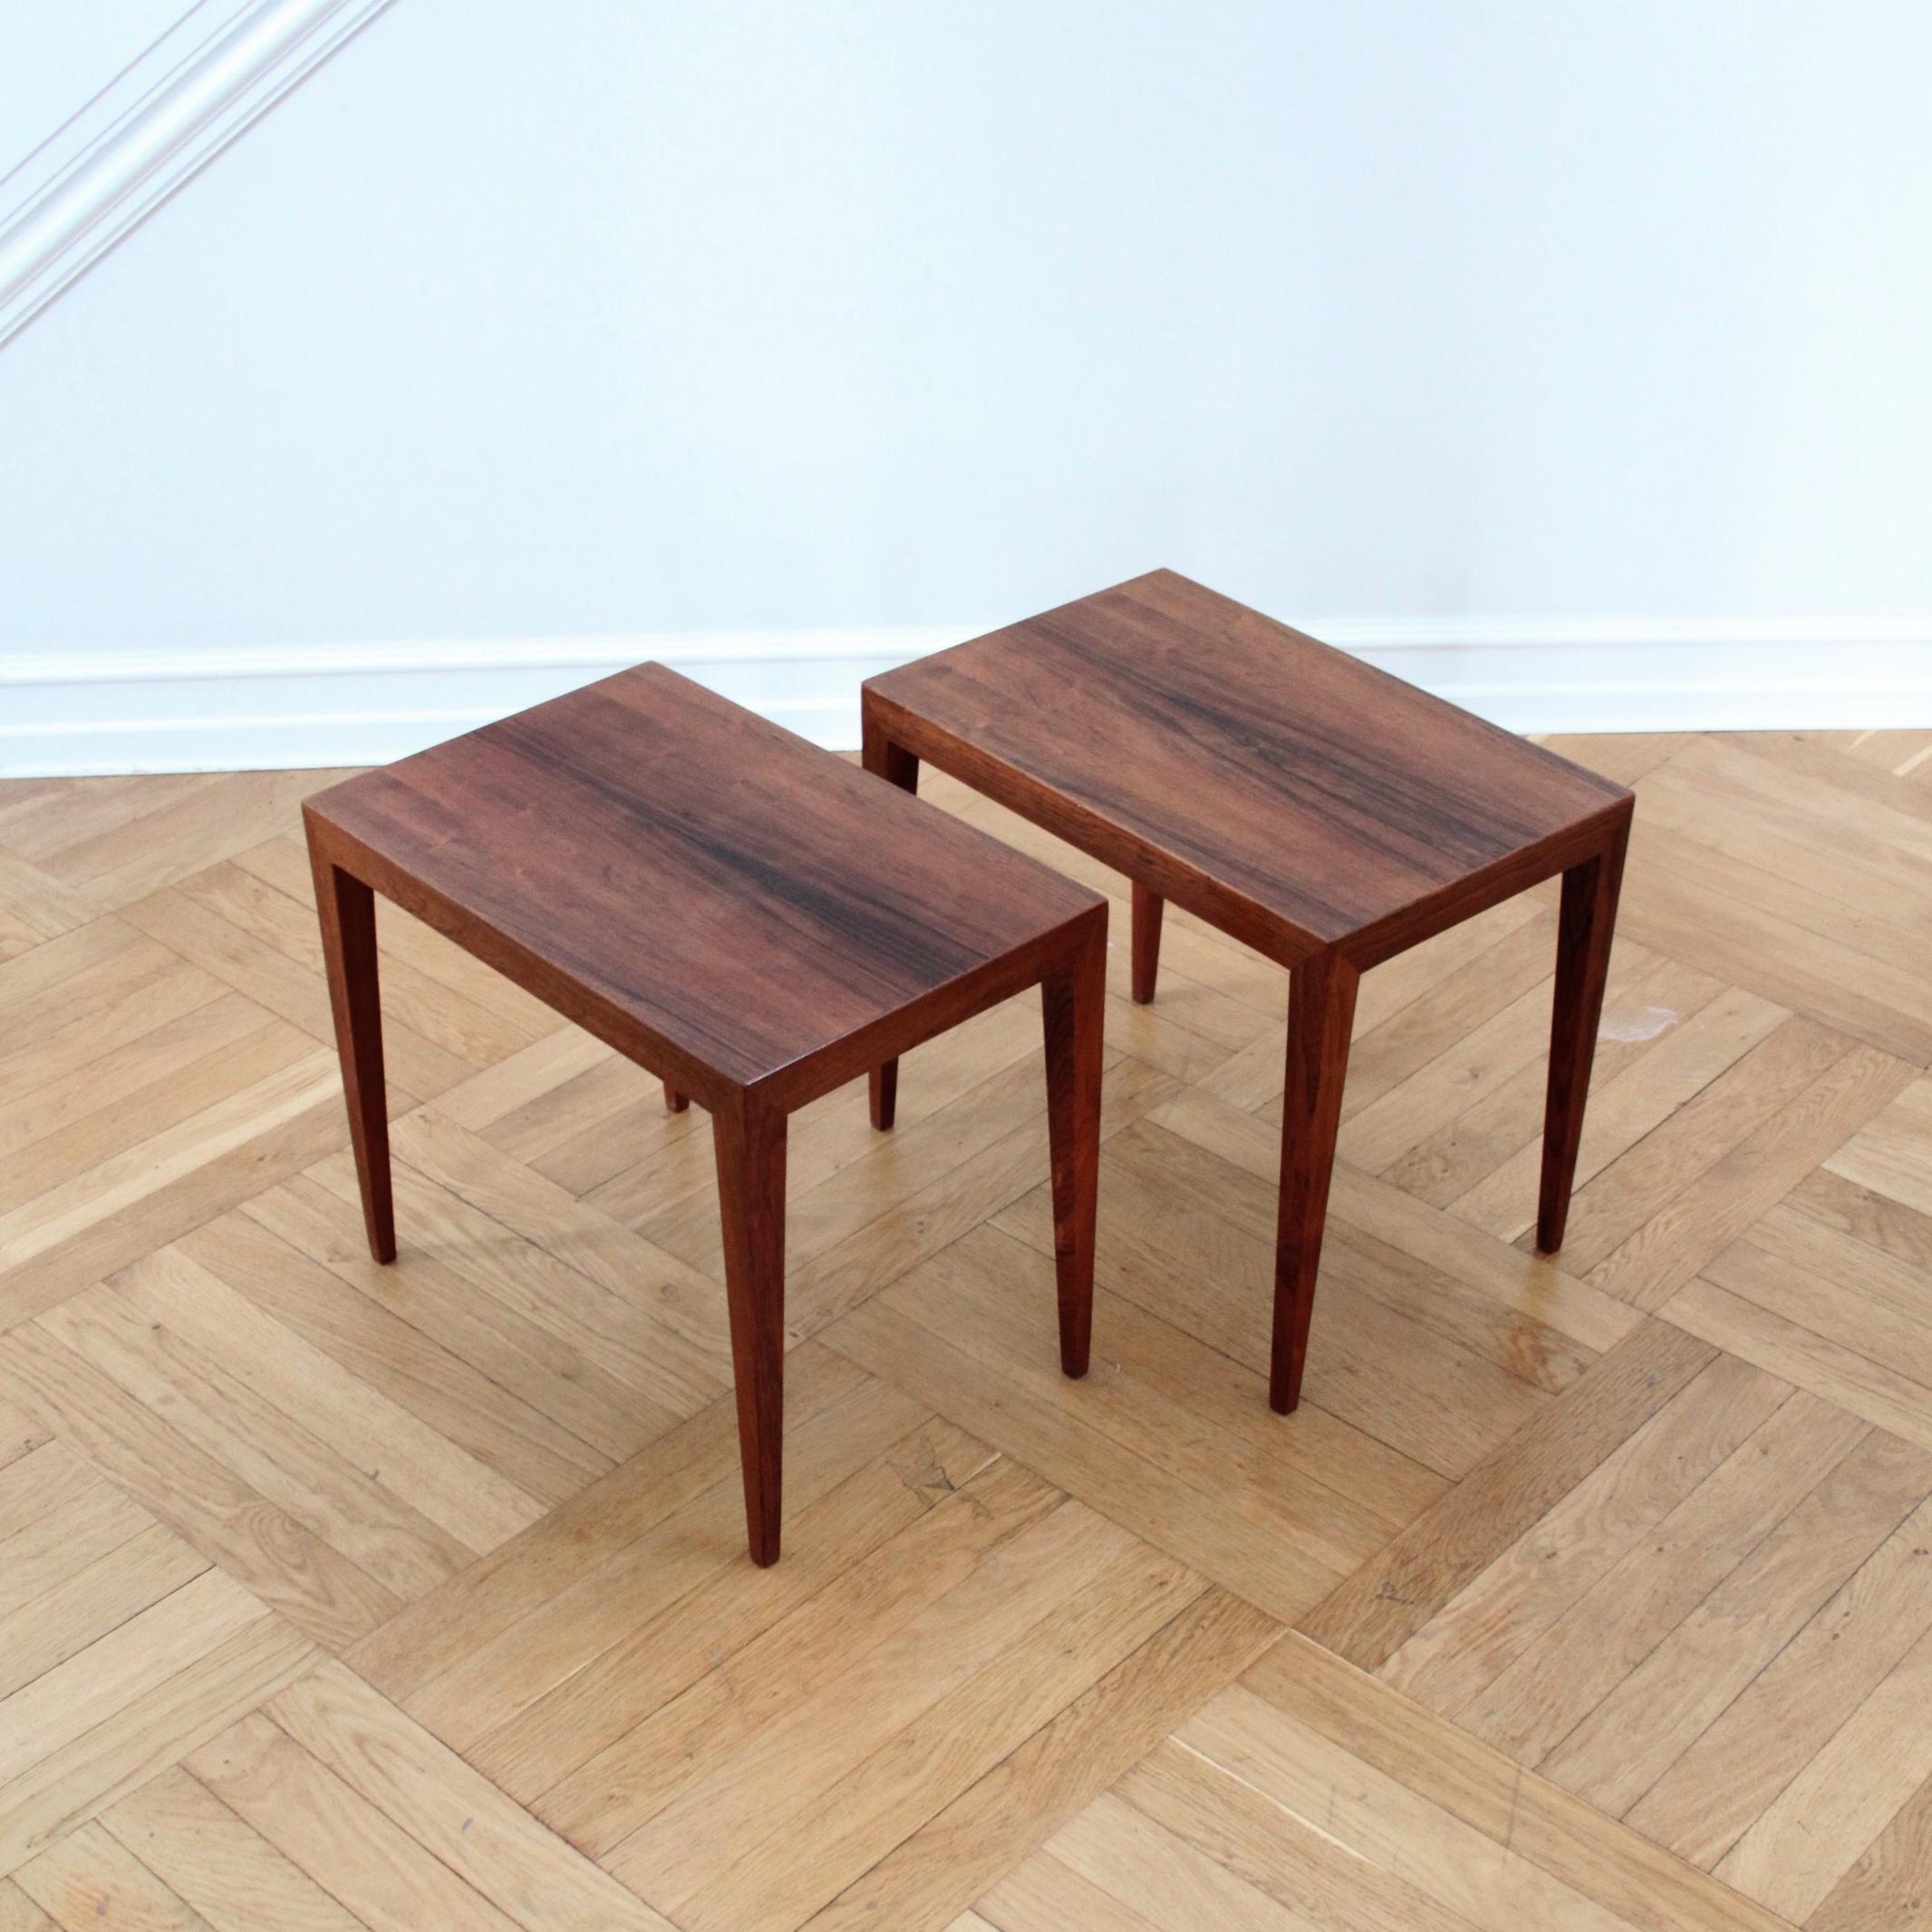 Oiled Pair of Severin Hansen Side Tables in Rosewood, Denmark, 1960s For Sale